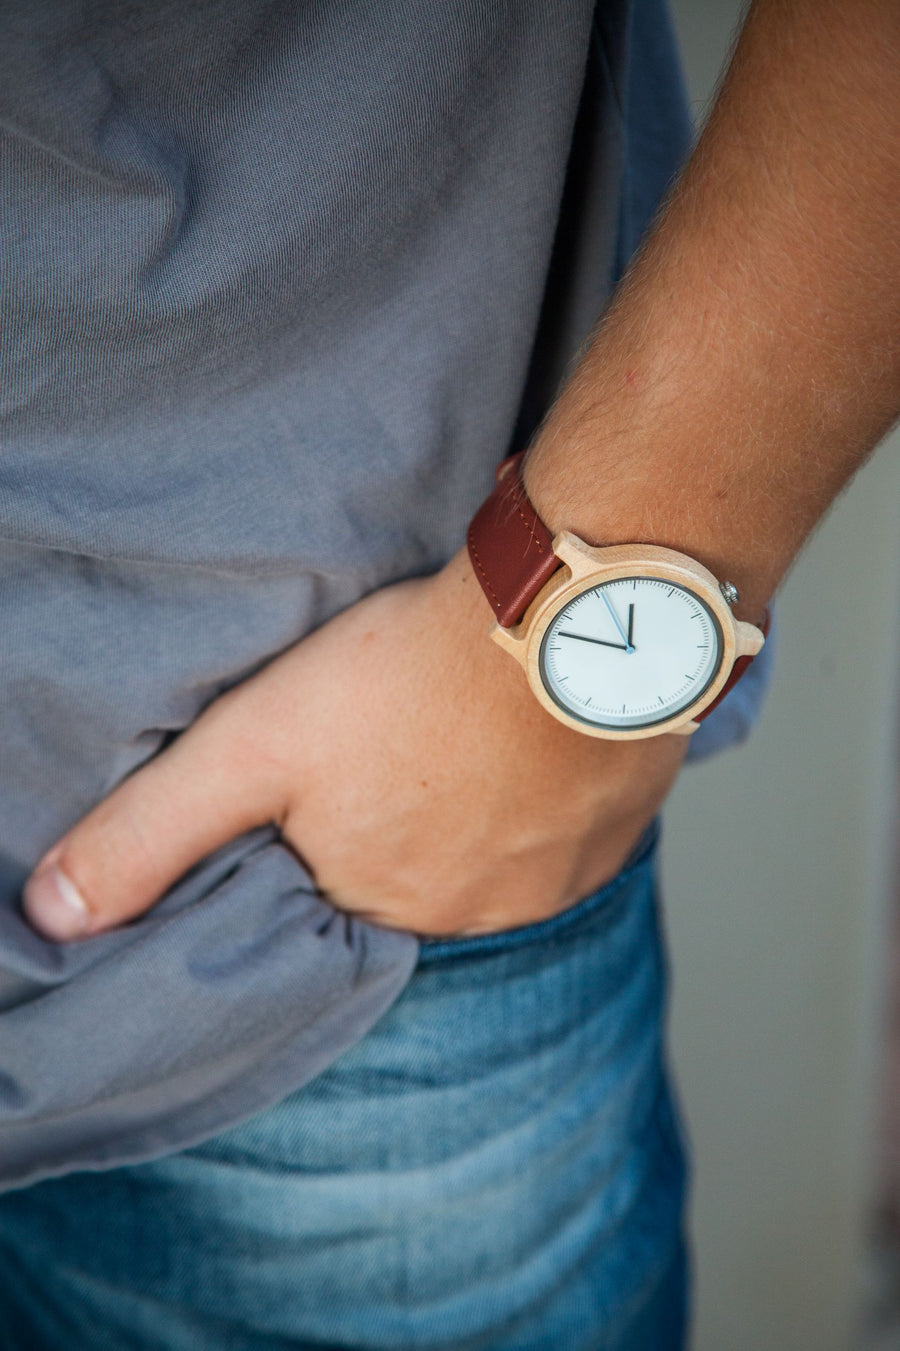 Atlas Maple | Wood Watch Leather Band Watches Grain and Oak